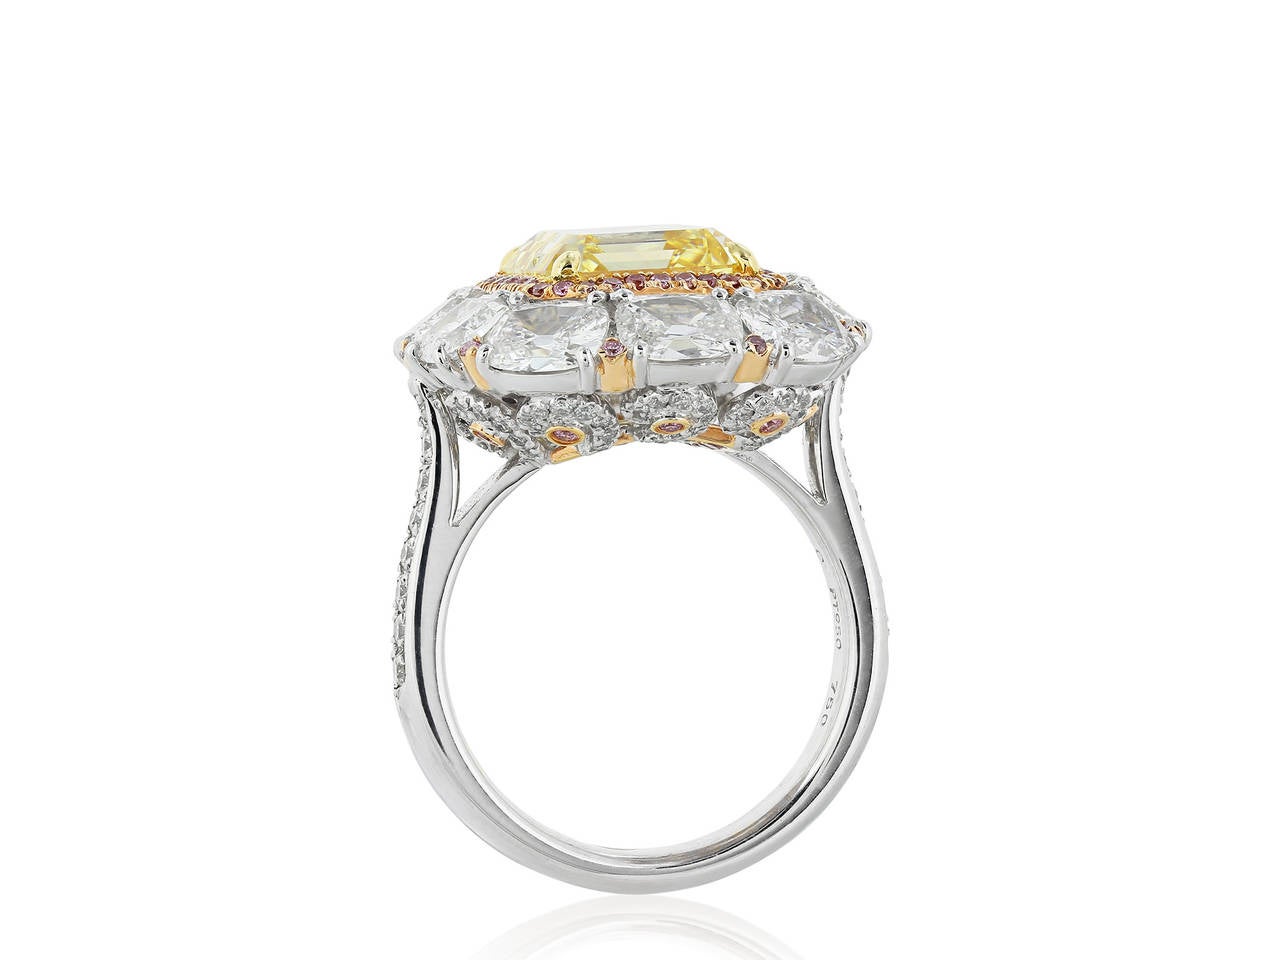 Platinum and 18 karat rose gold cluster style ring consisting of one emerald cut natural canary diamond weighing 5.08 carats, measuring 9.86 x 8.70 x 6.17 mm, having a color and clarity of Fancy Intense Yellow/ VS2 with GIA Report 5141643187,